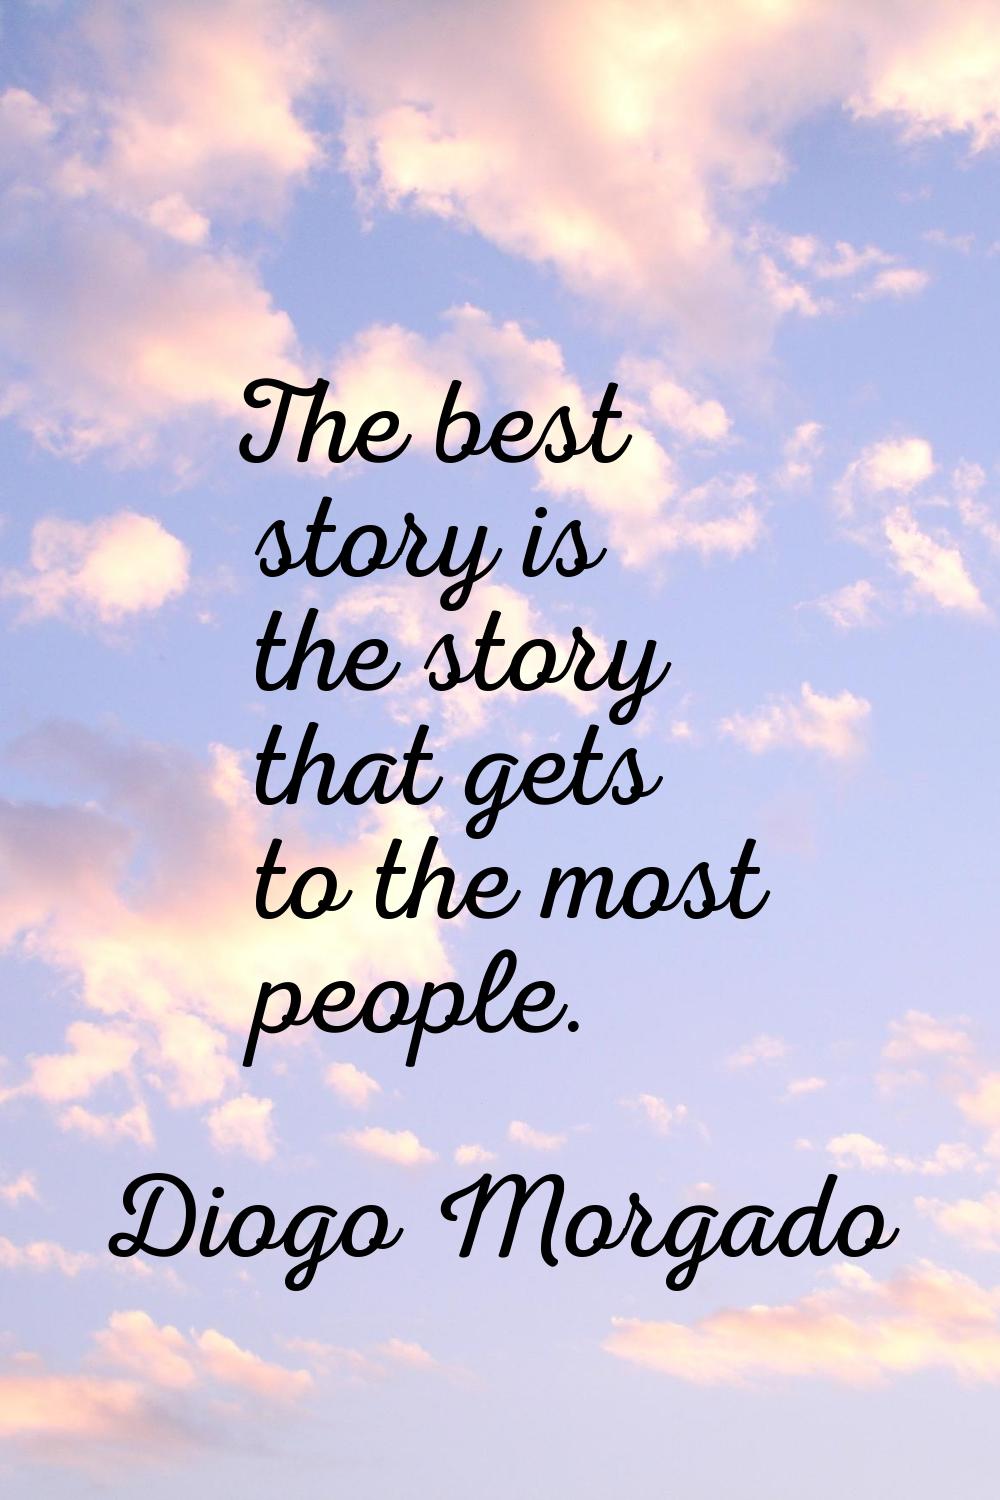 The best story is the story that gets to the most people.